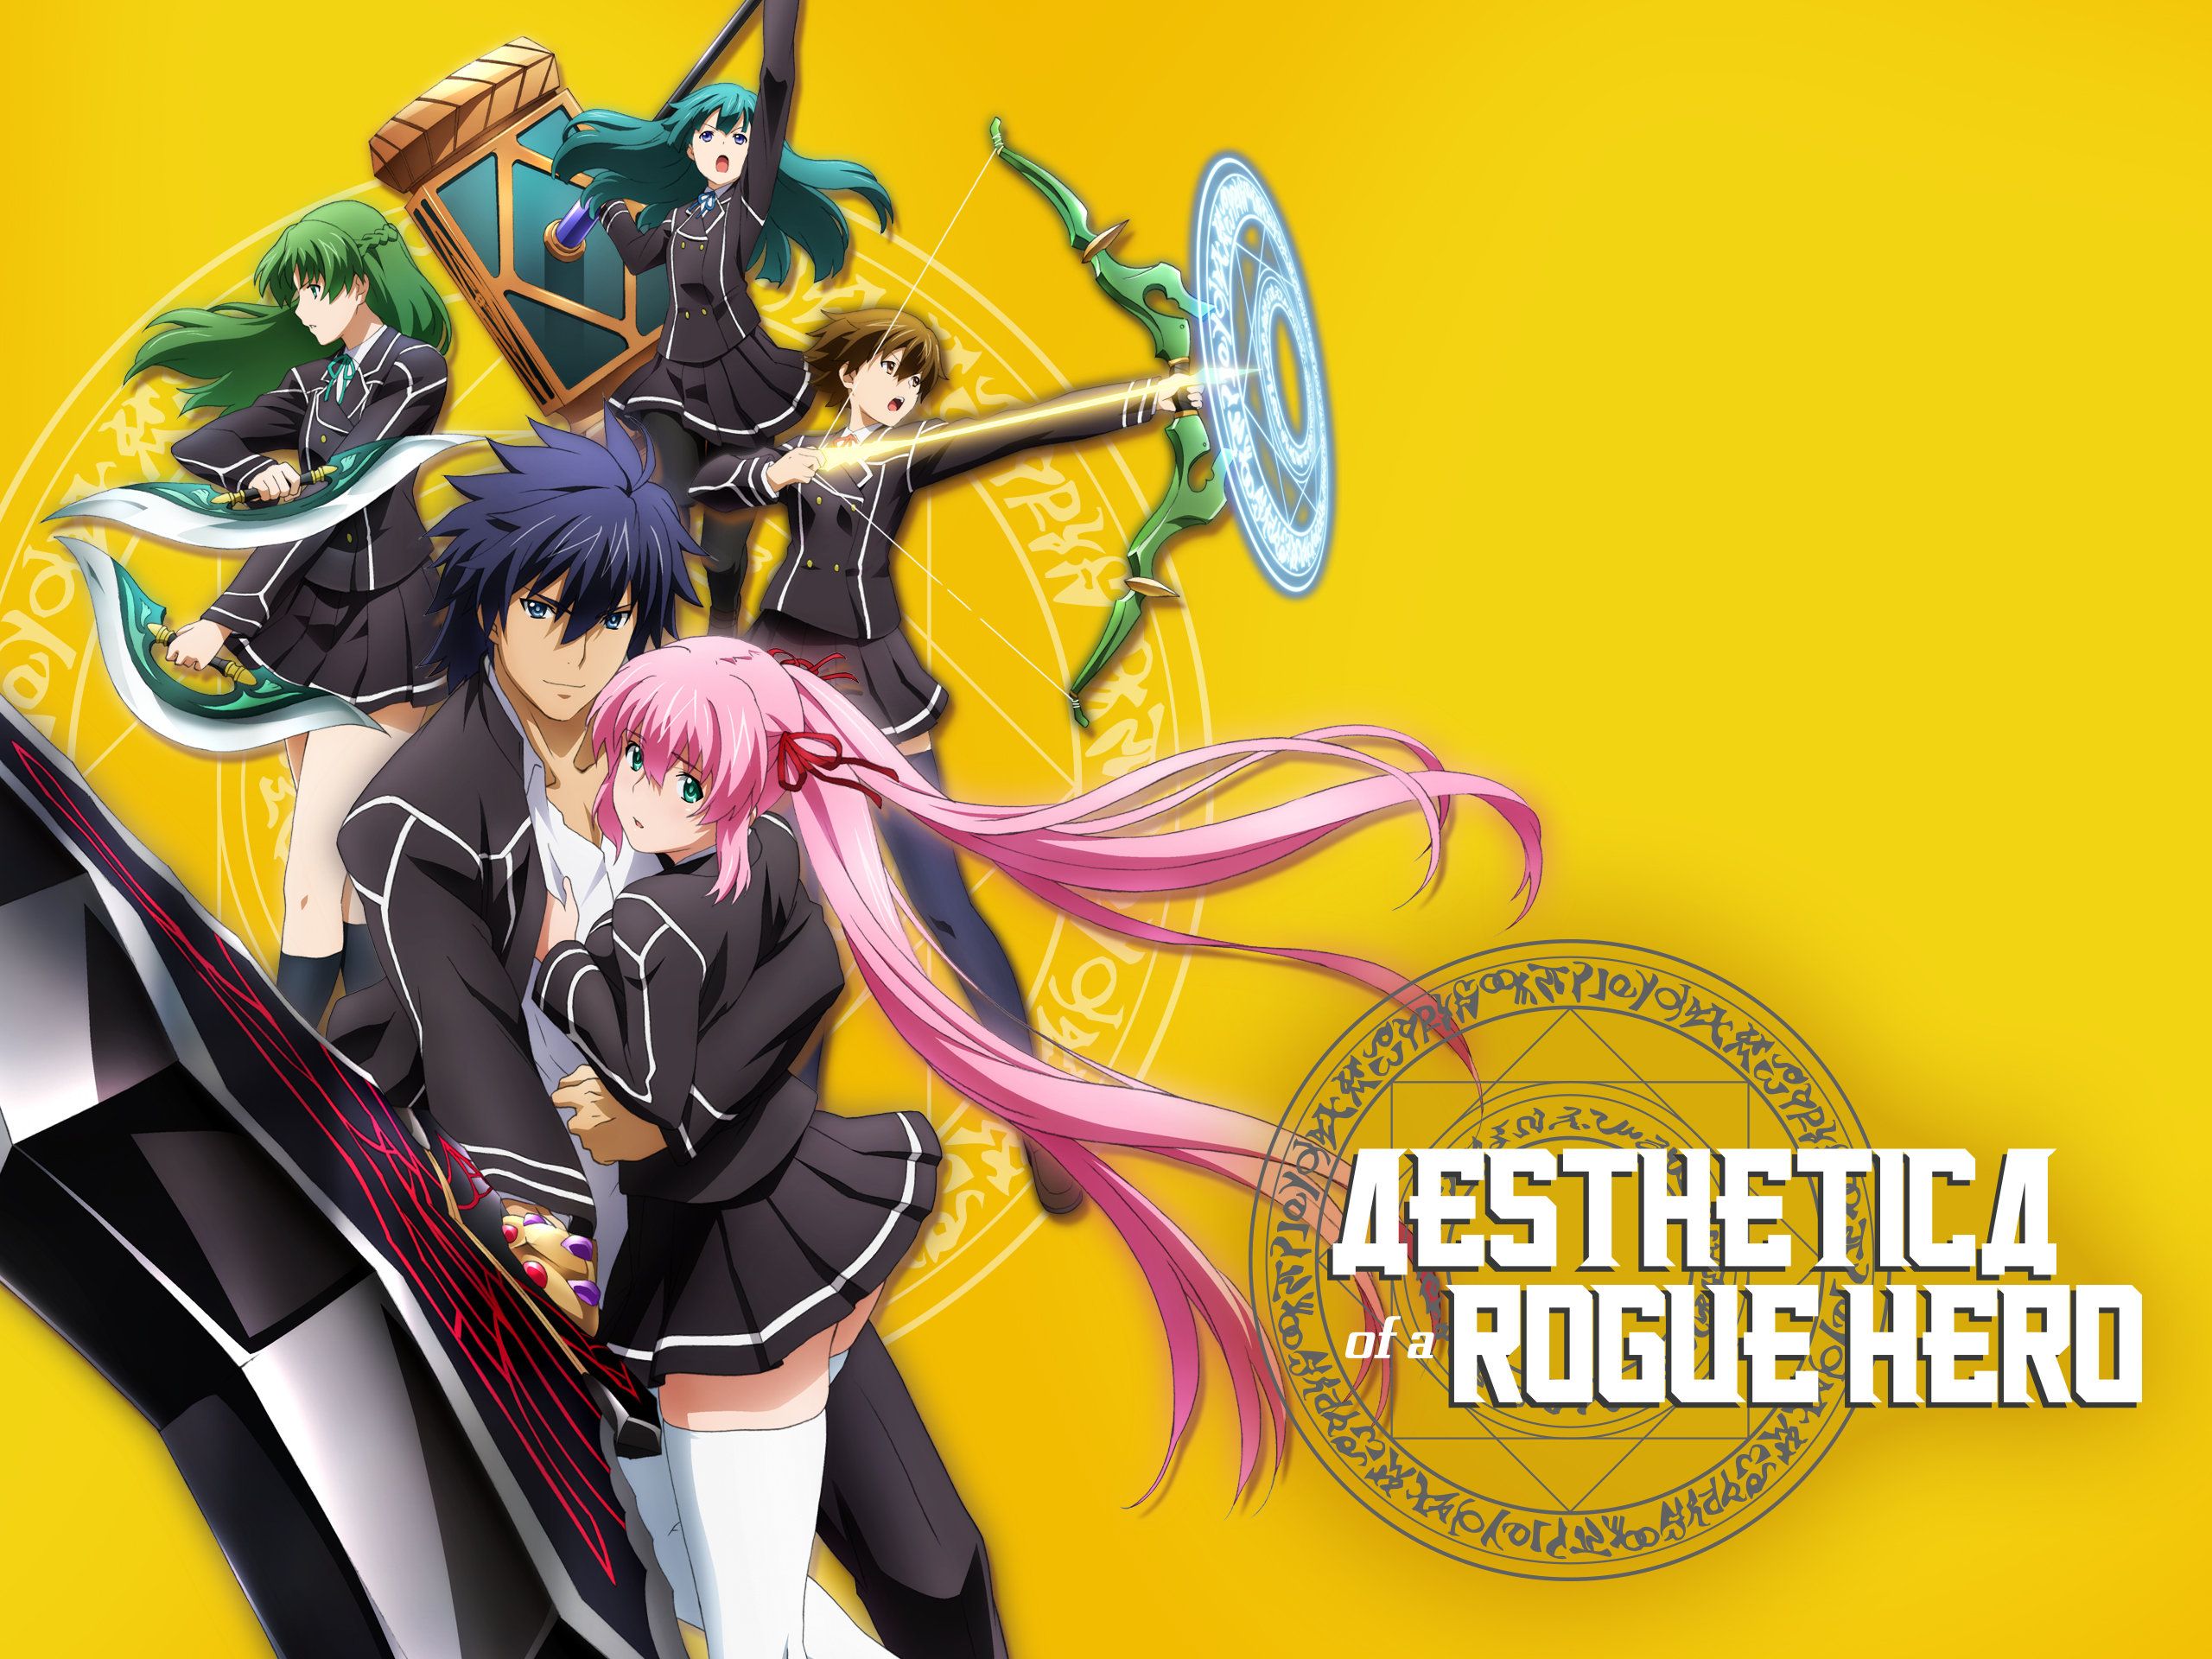 Aesthetic of a Rogue Hero anime key visual featuring the main characters in front of a yellow background - Aesthetica of a Rogue Hero